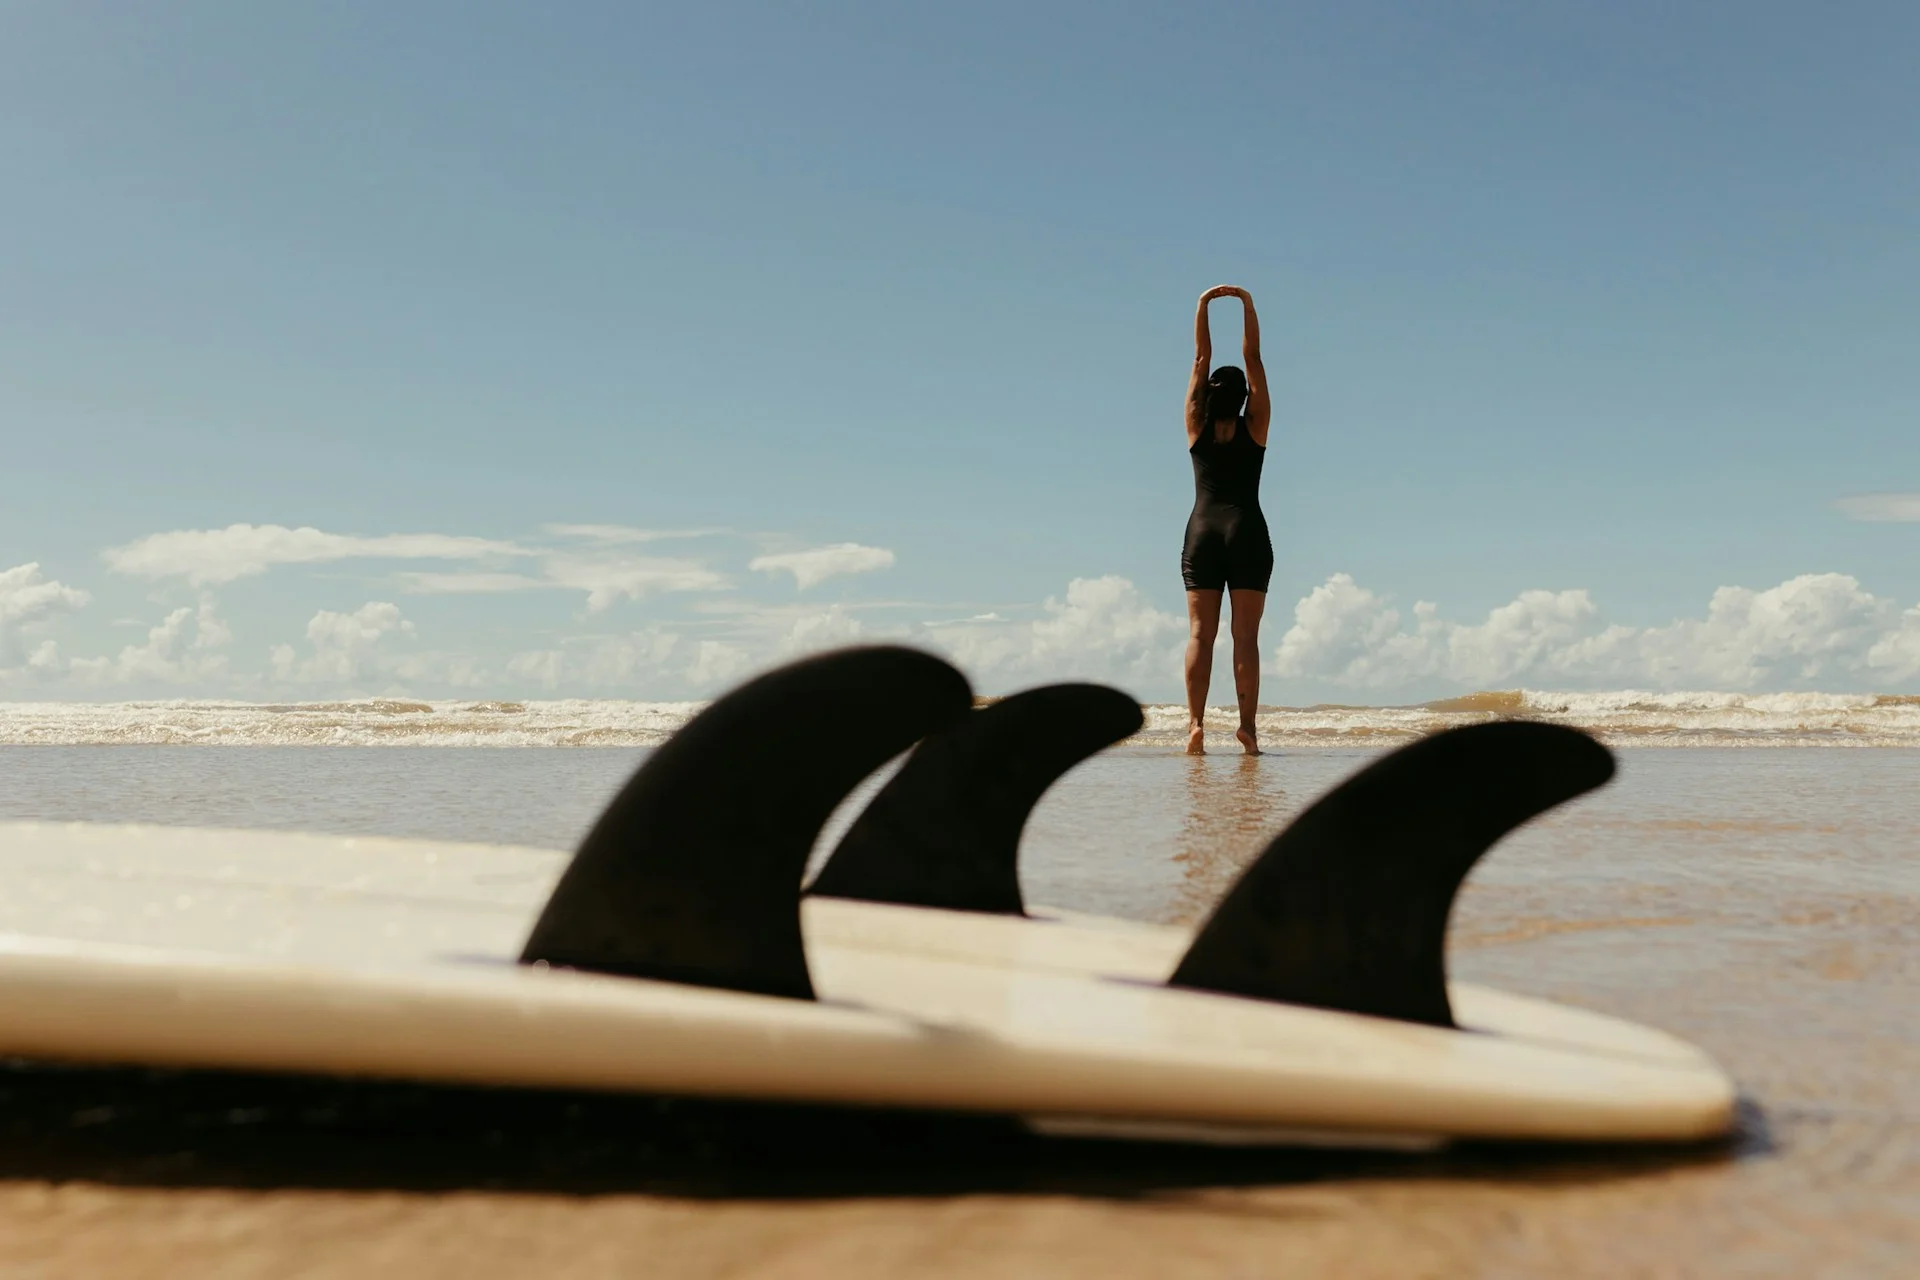 photo - a woman in the background on the beach stretching and thinking about safe surfing practices with her surfboard ont he foreground 